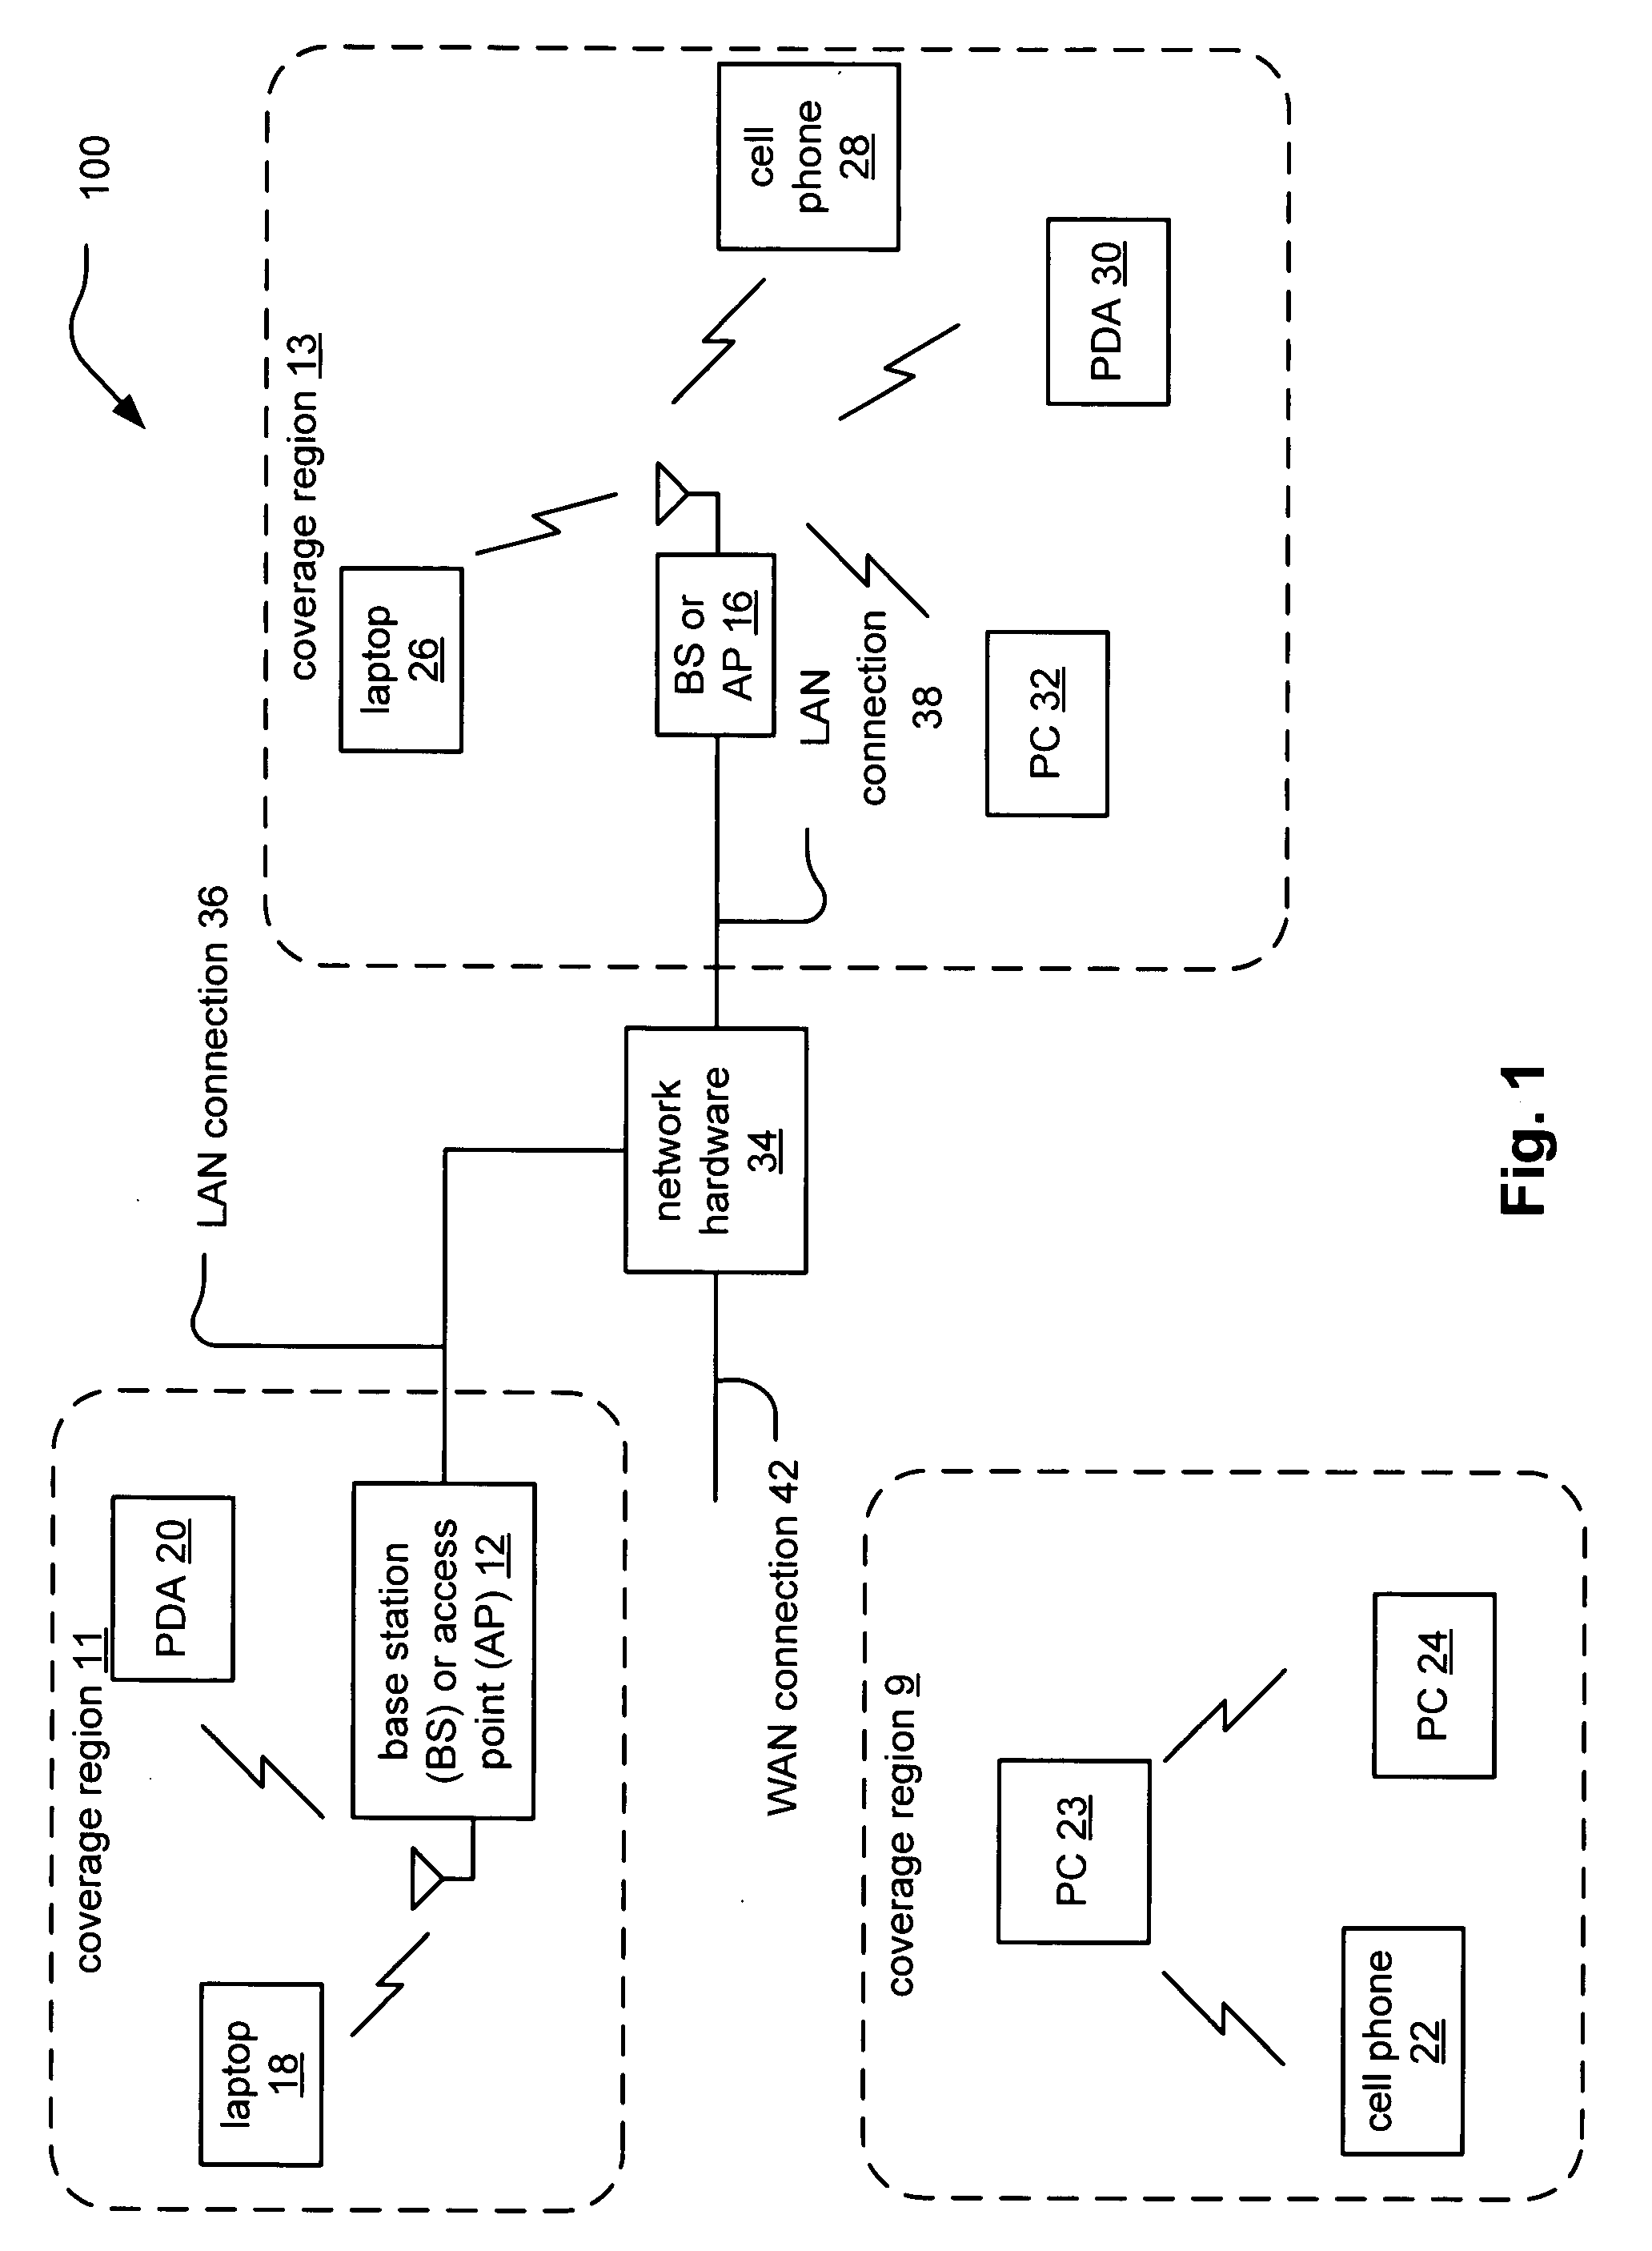 Spatial mapping of wireless access point service area